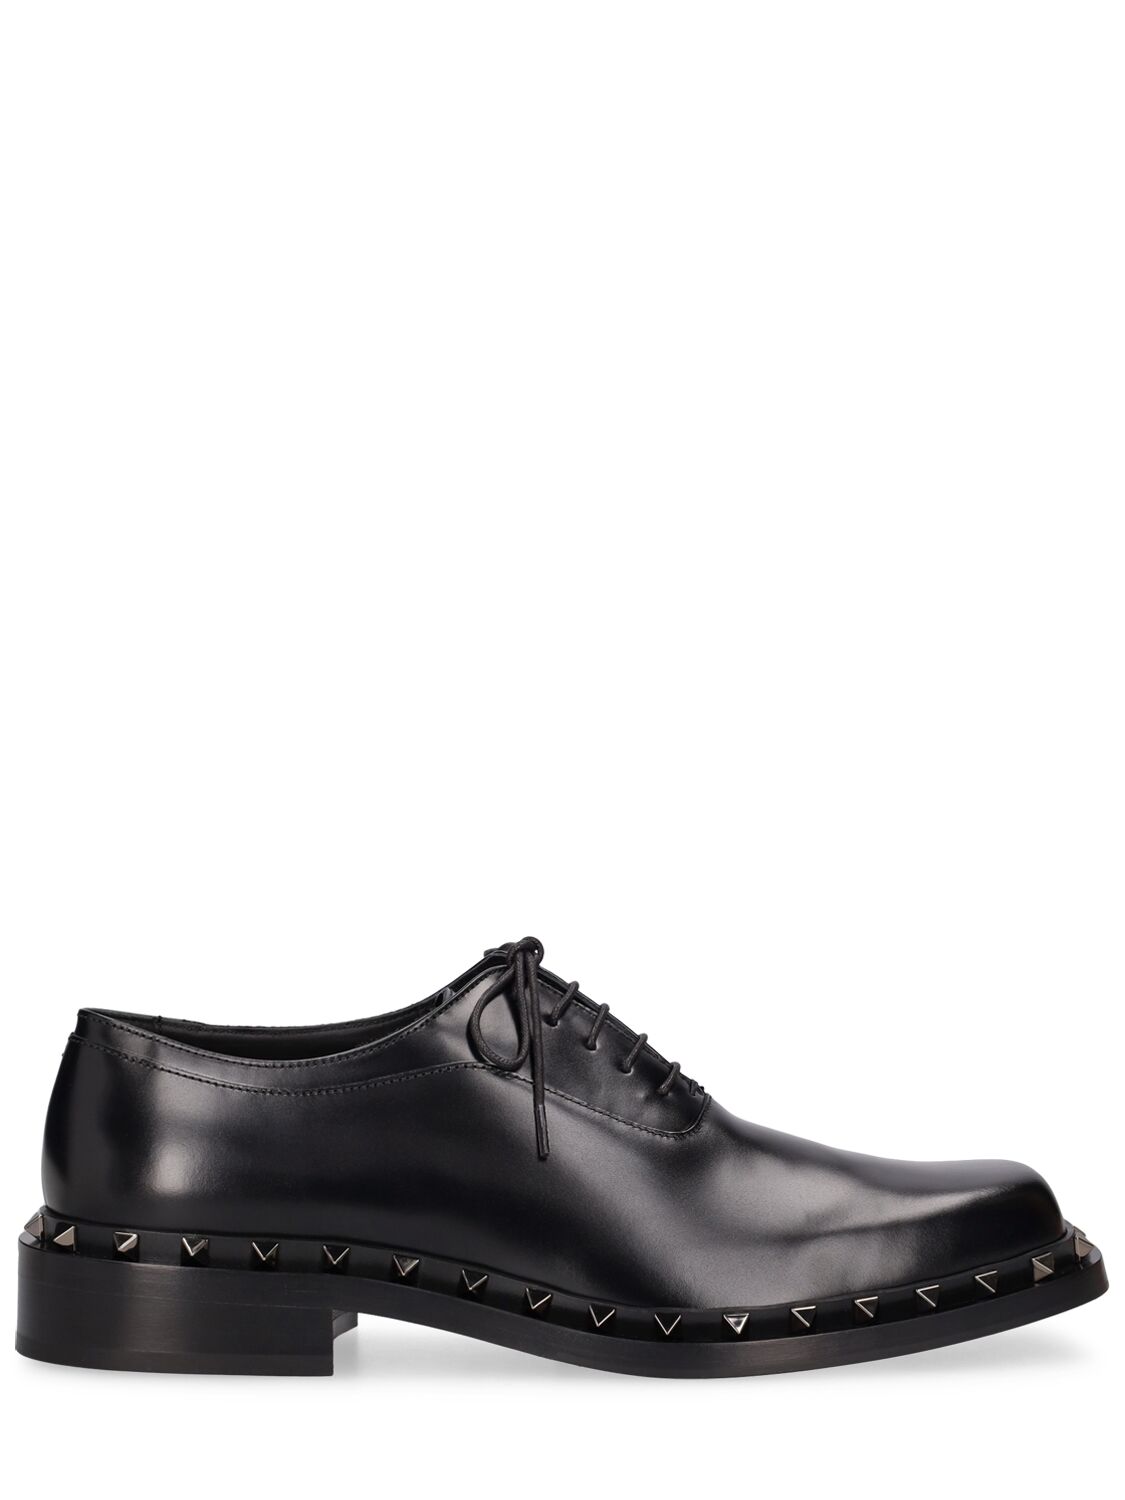 Valentino lace-up brogues - Black